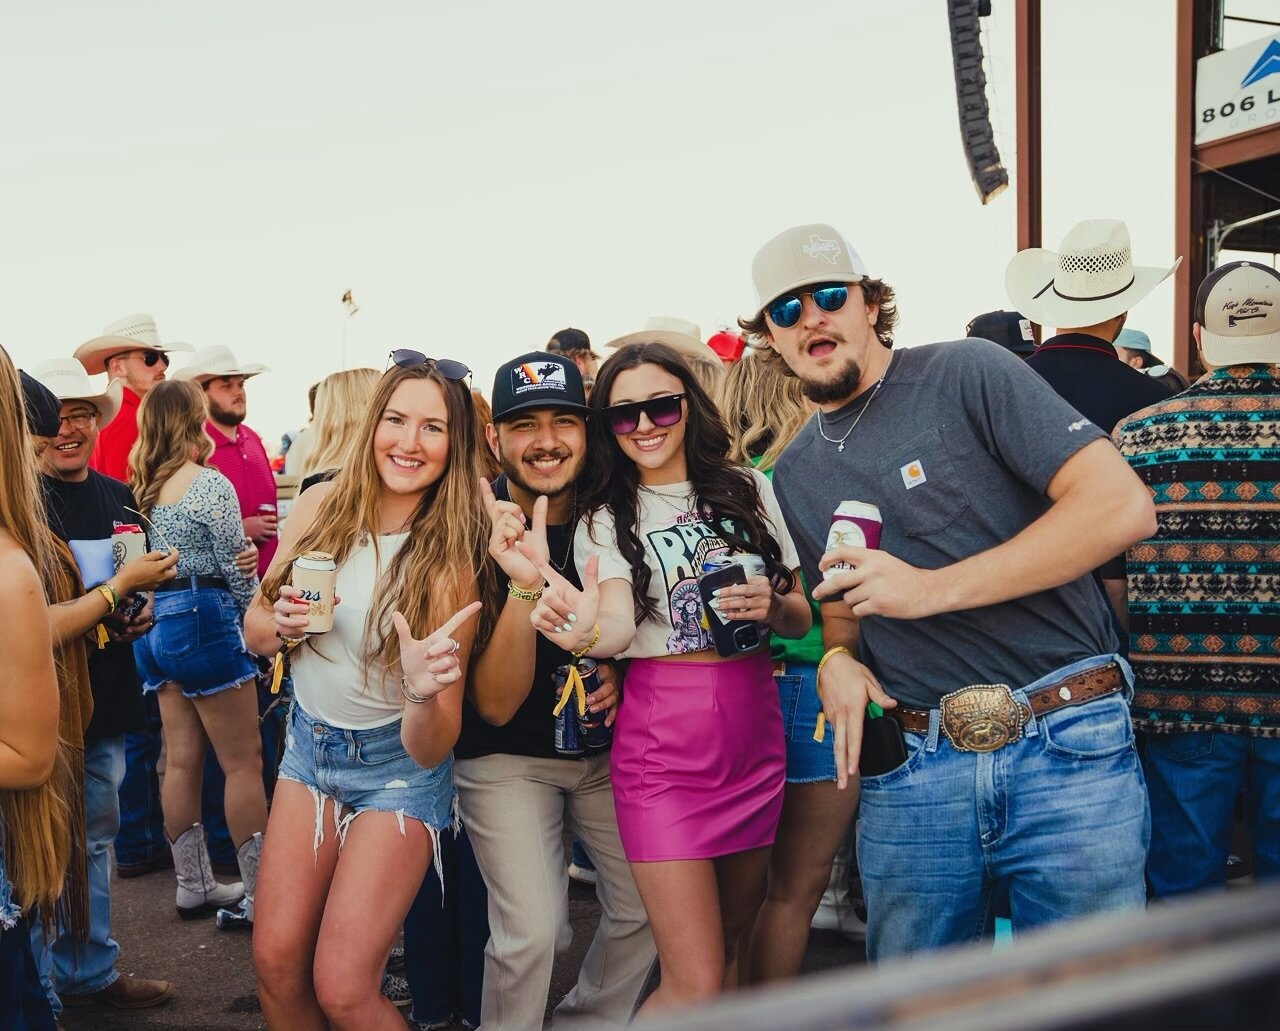 IT&rsquo;S GIVEAWAY TIME! Comment below with your favorite Cotton Fest memory to enter to win a pair of &ldquo;Boll&rdquo; VIP Passes! These include Thursday night VIP access AND 2-day GA passes. We&rsquo;ll DM the winner on Friday. Good luck!